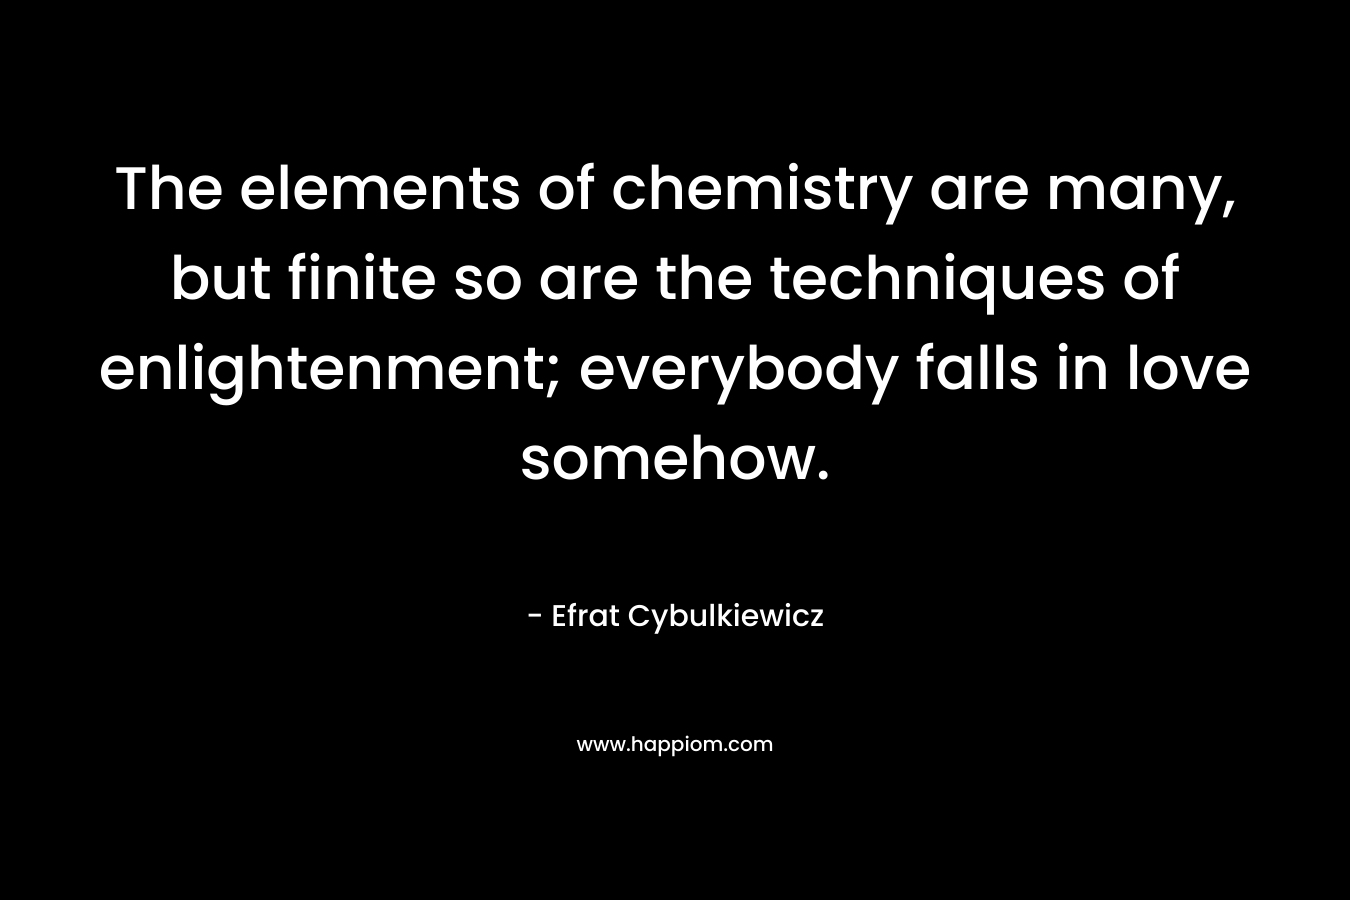 The elements of chemistry are many, but finite so are the techniques of enlightenment; everybody falls in love somehow. – Efrat Cybulkiewicz